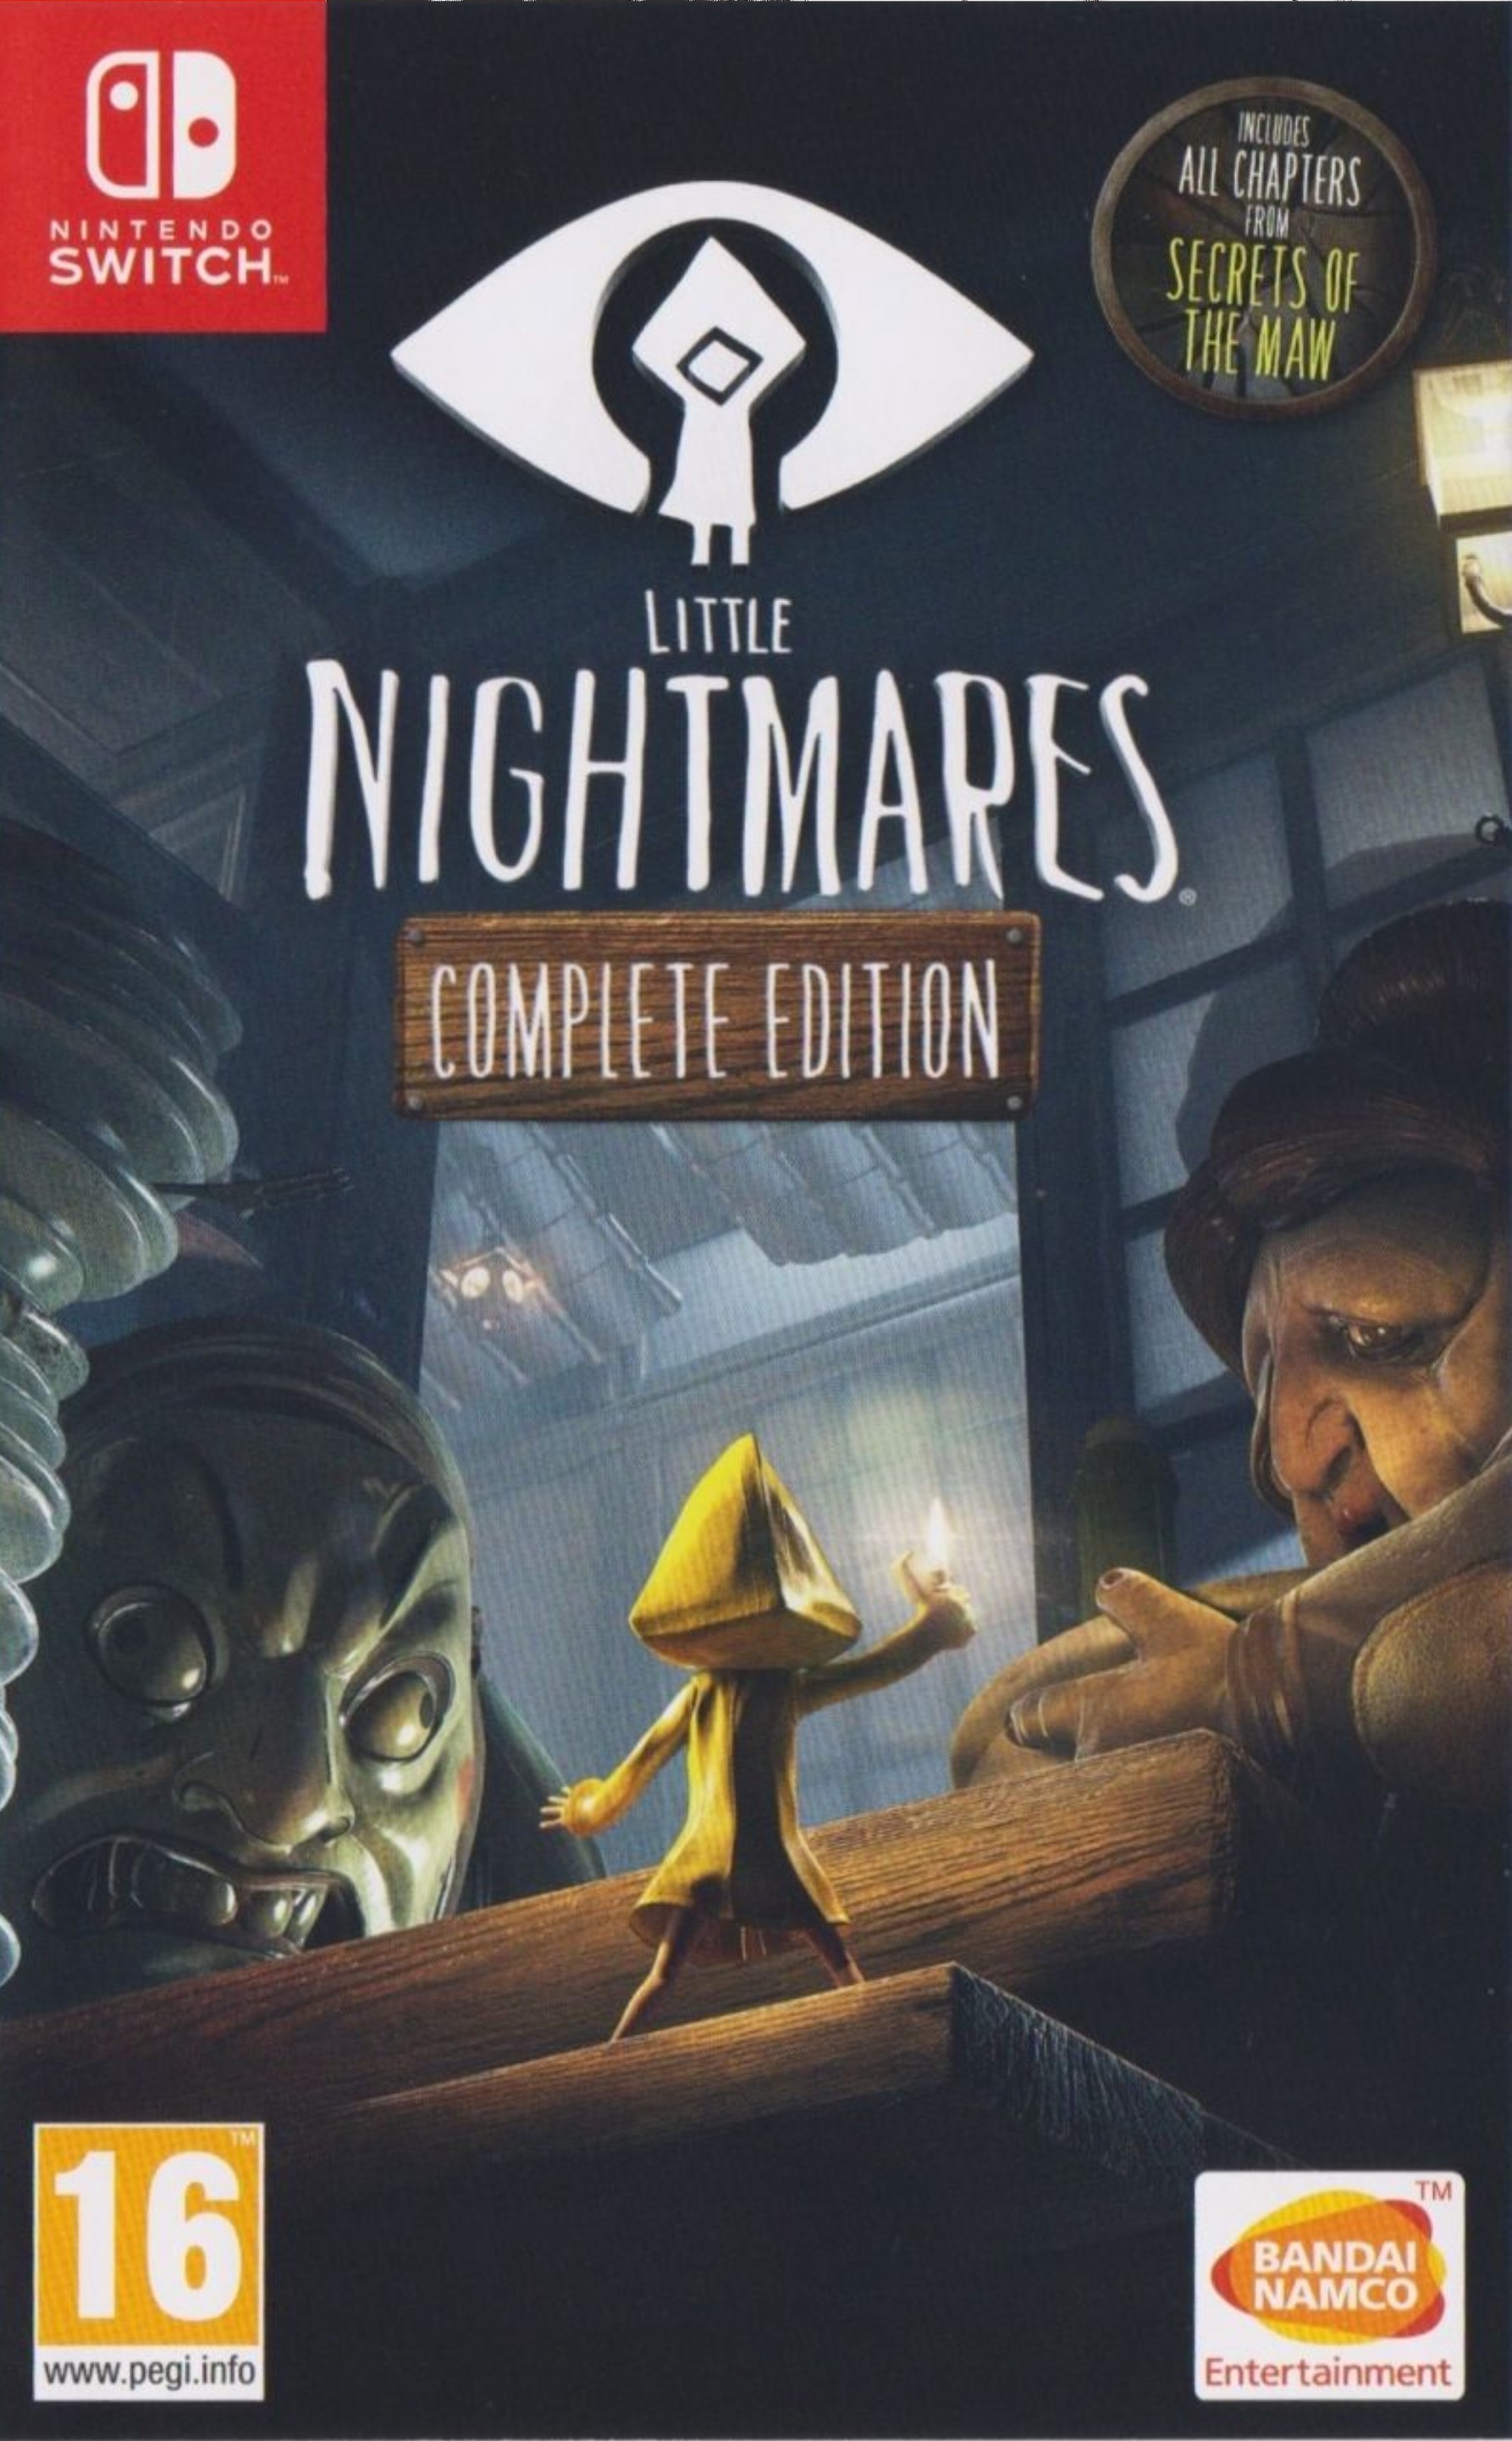 'Little Nightmares: Complete Edition'